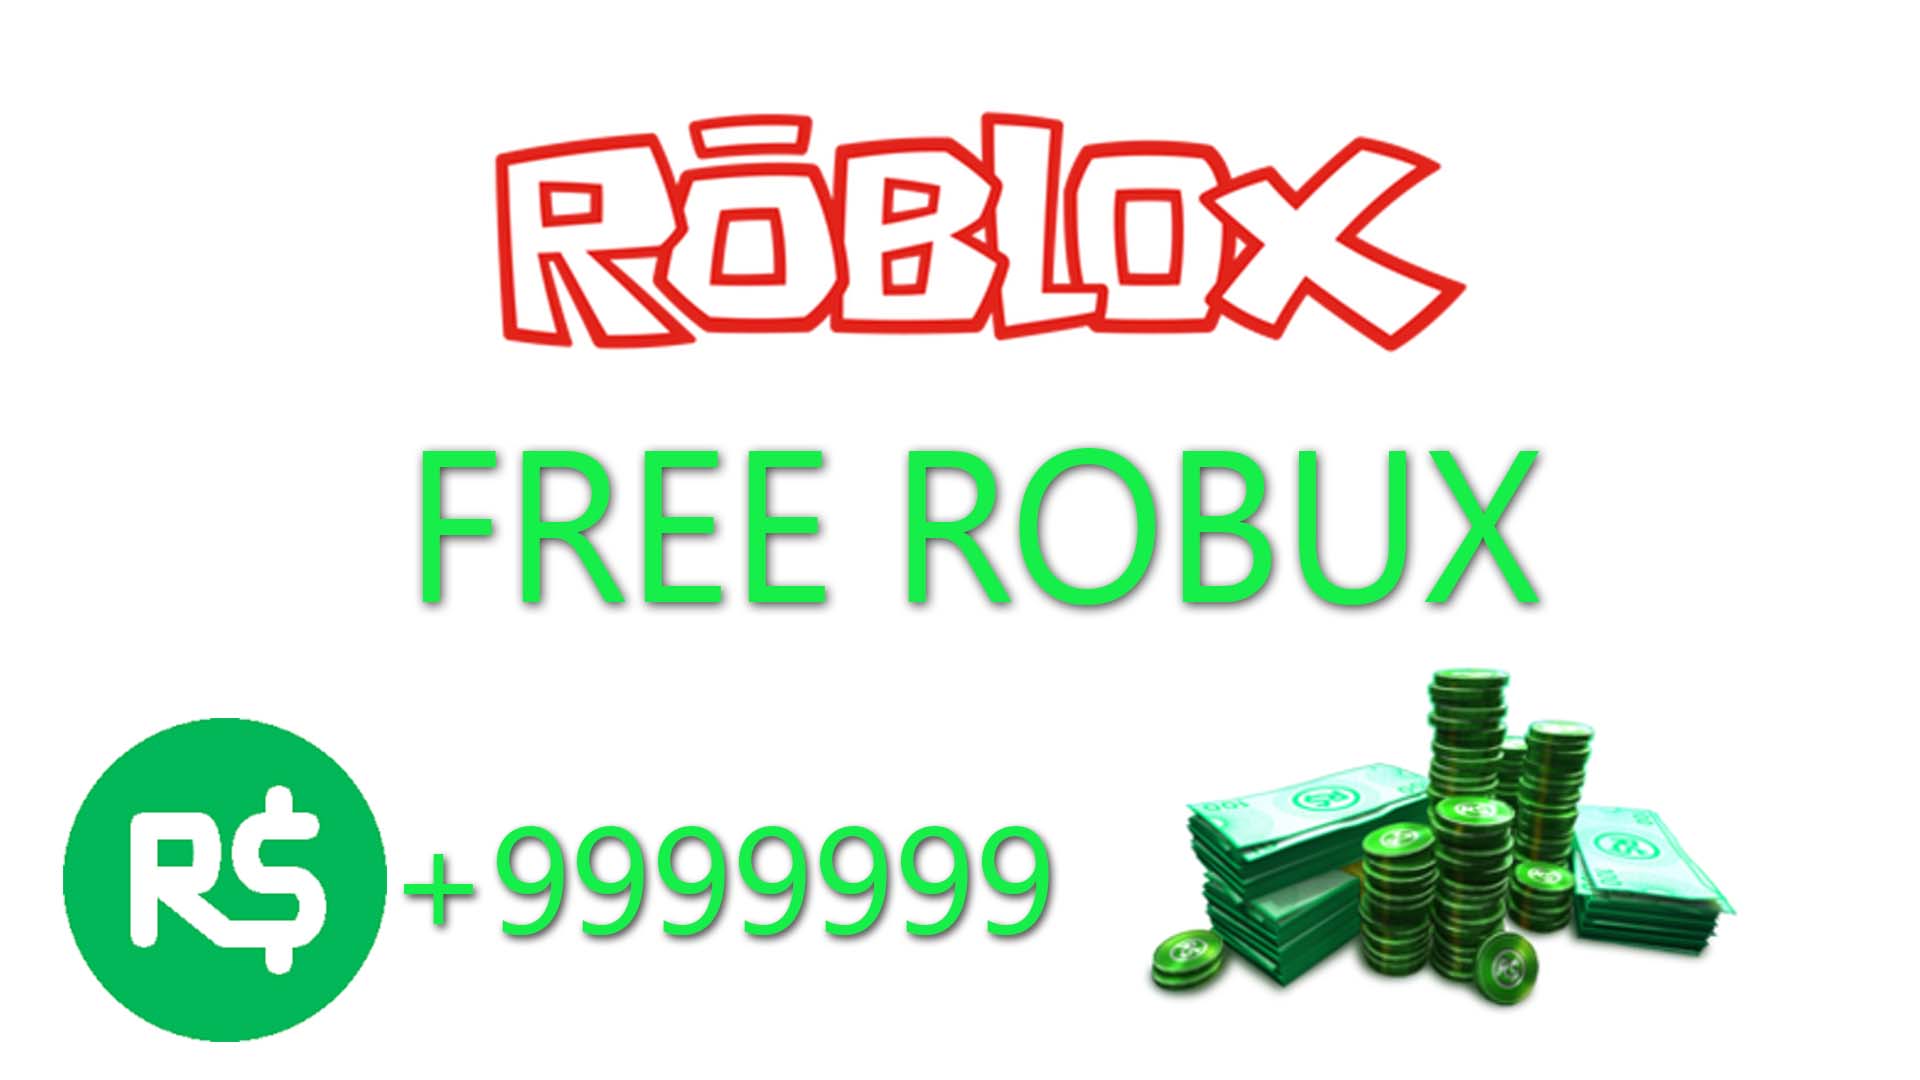 hack robux tips roblox easy techkeyhub succeed